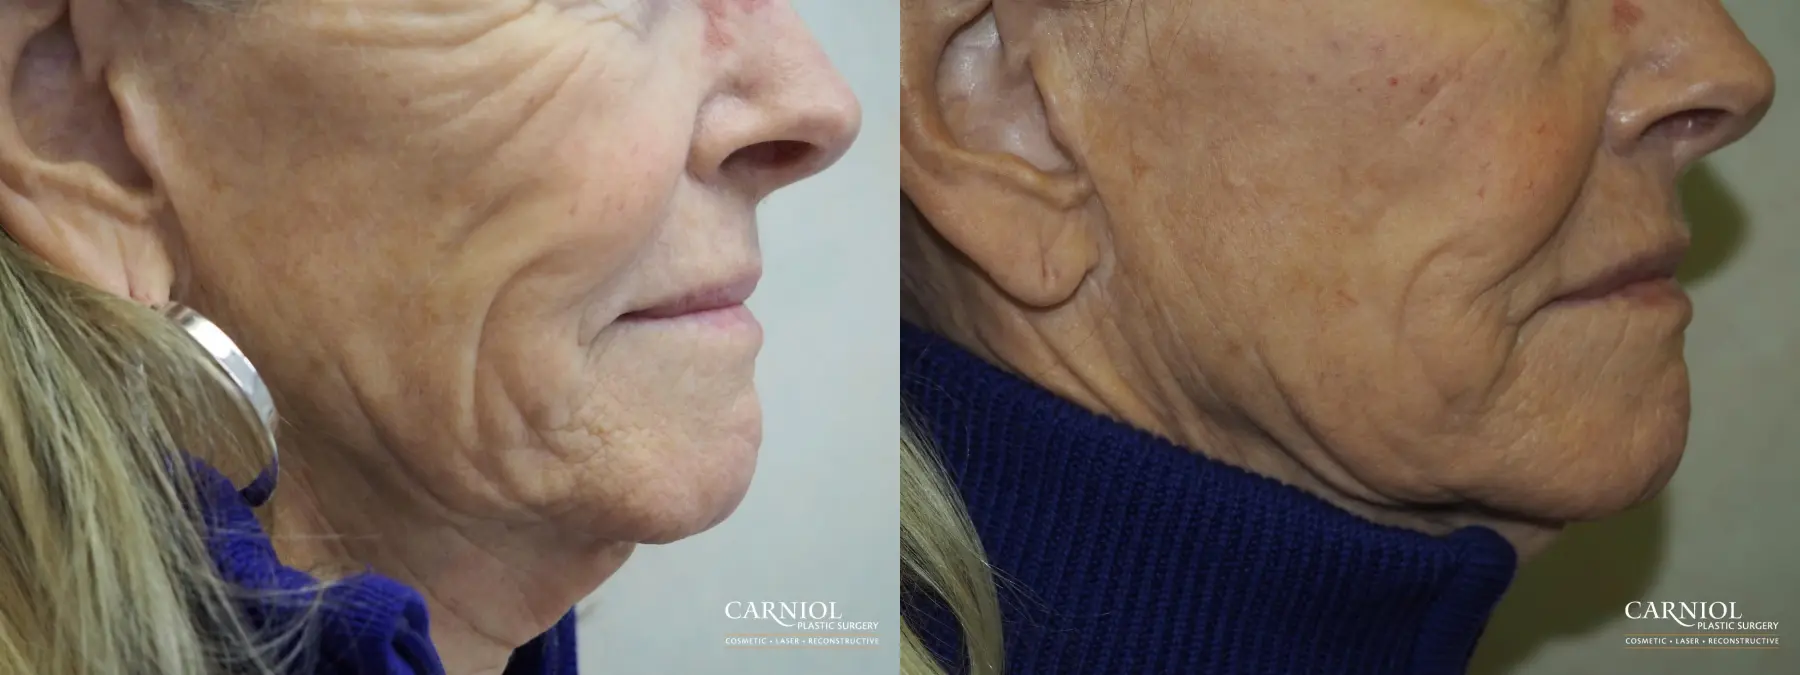 Non-Surgical Facelift: Patient 8 - Before and After 1